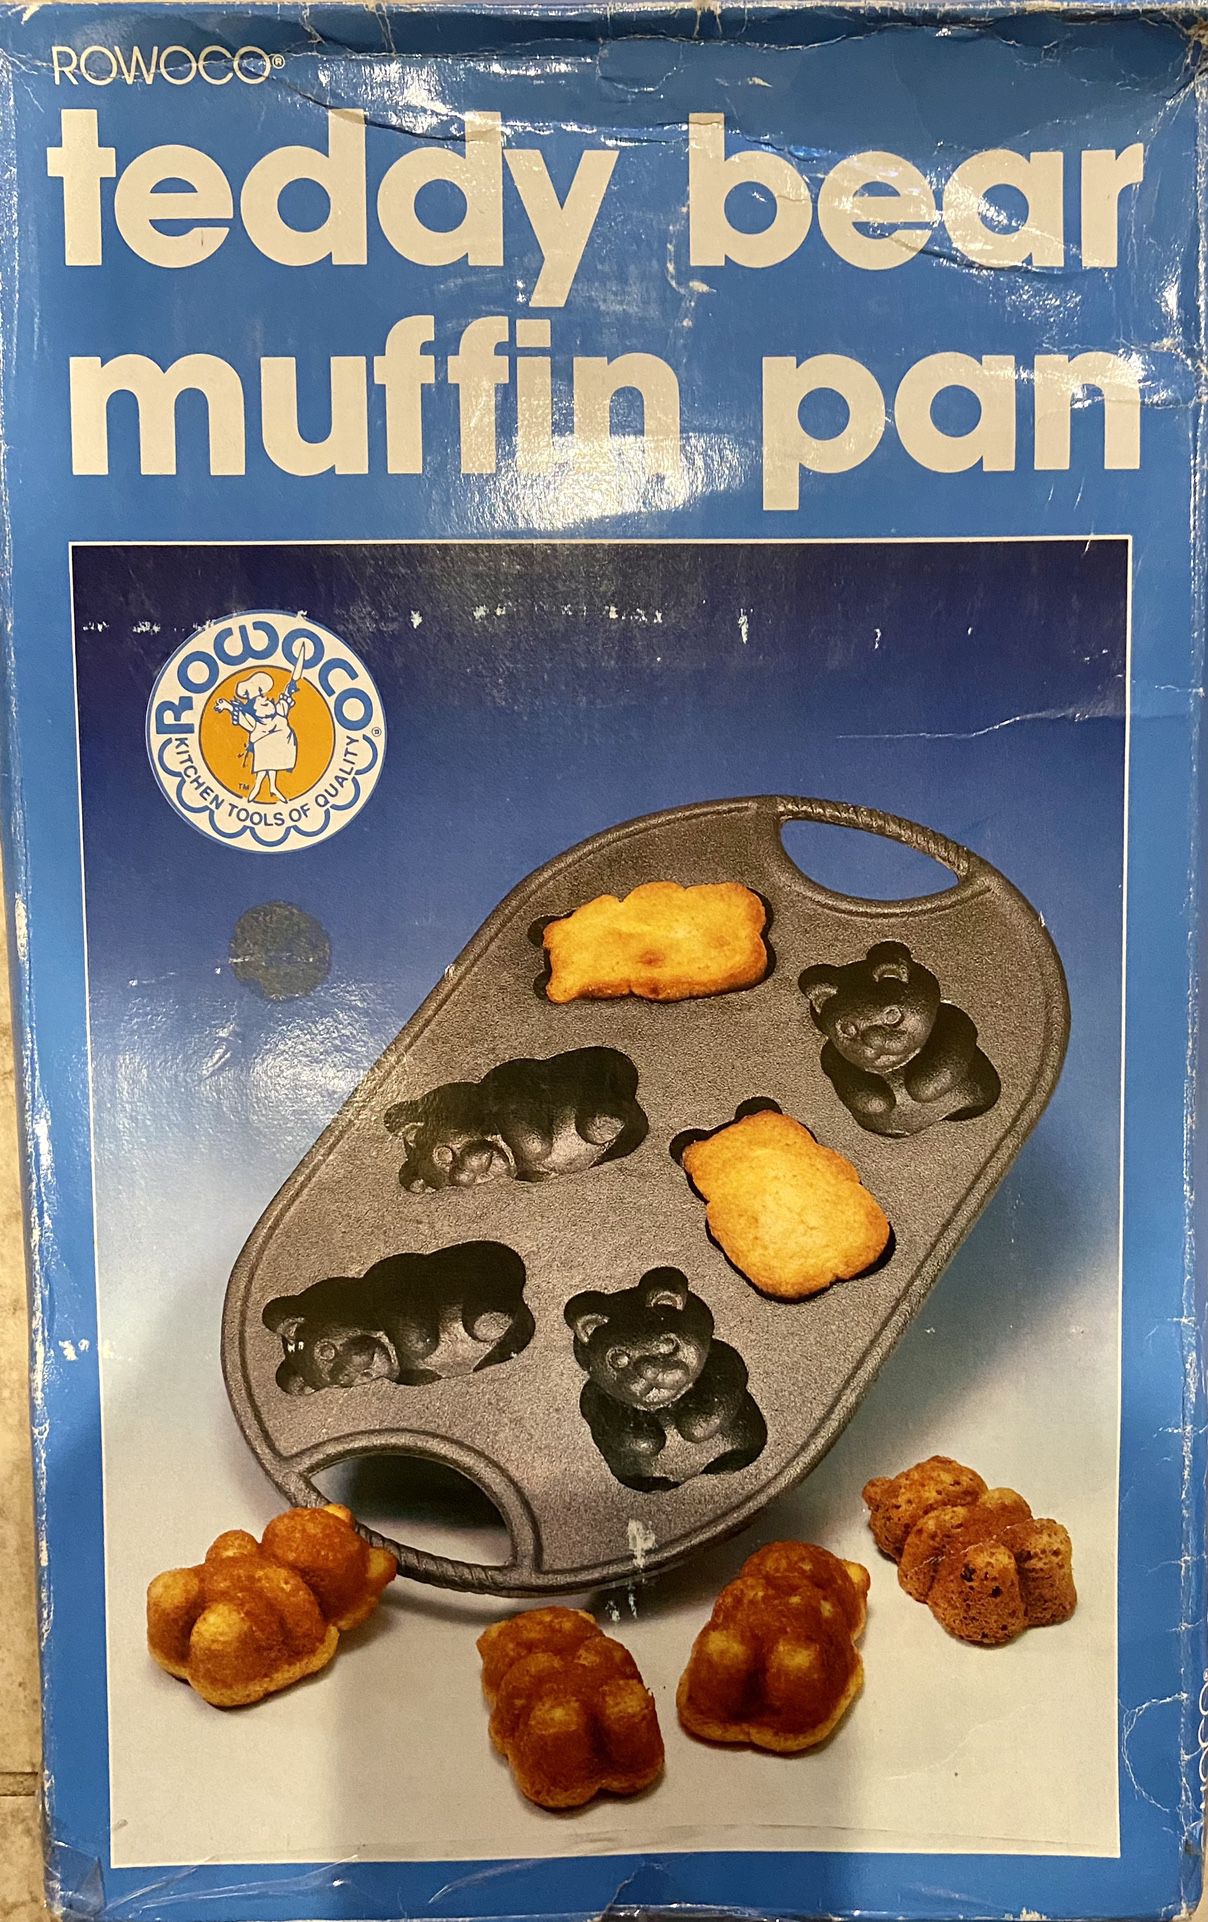 Disney Rare Lodge Cast Iron Winnie The Pooh & Friends Baking Muffin Pan for  Sale in Las Vegas, NV - OfferUp